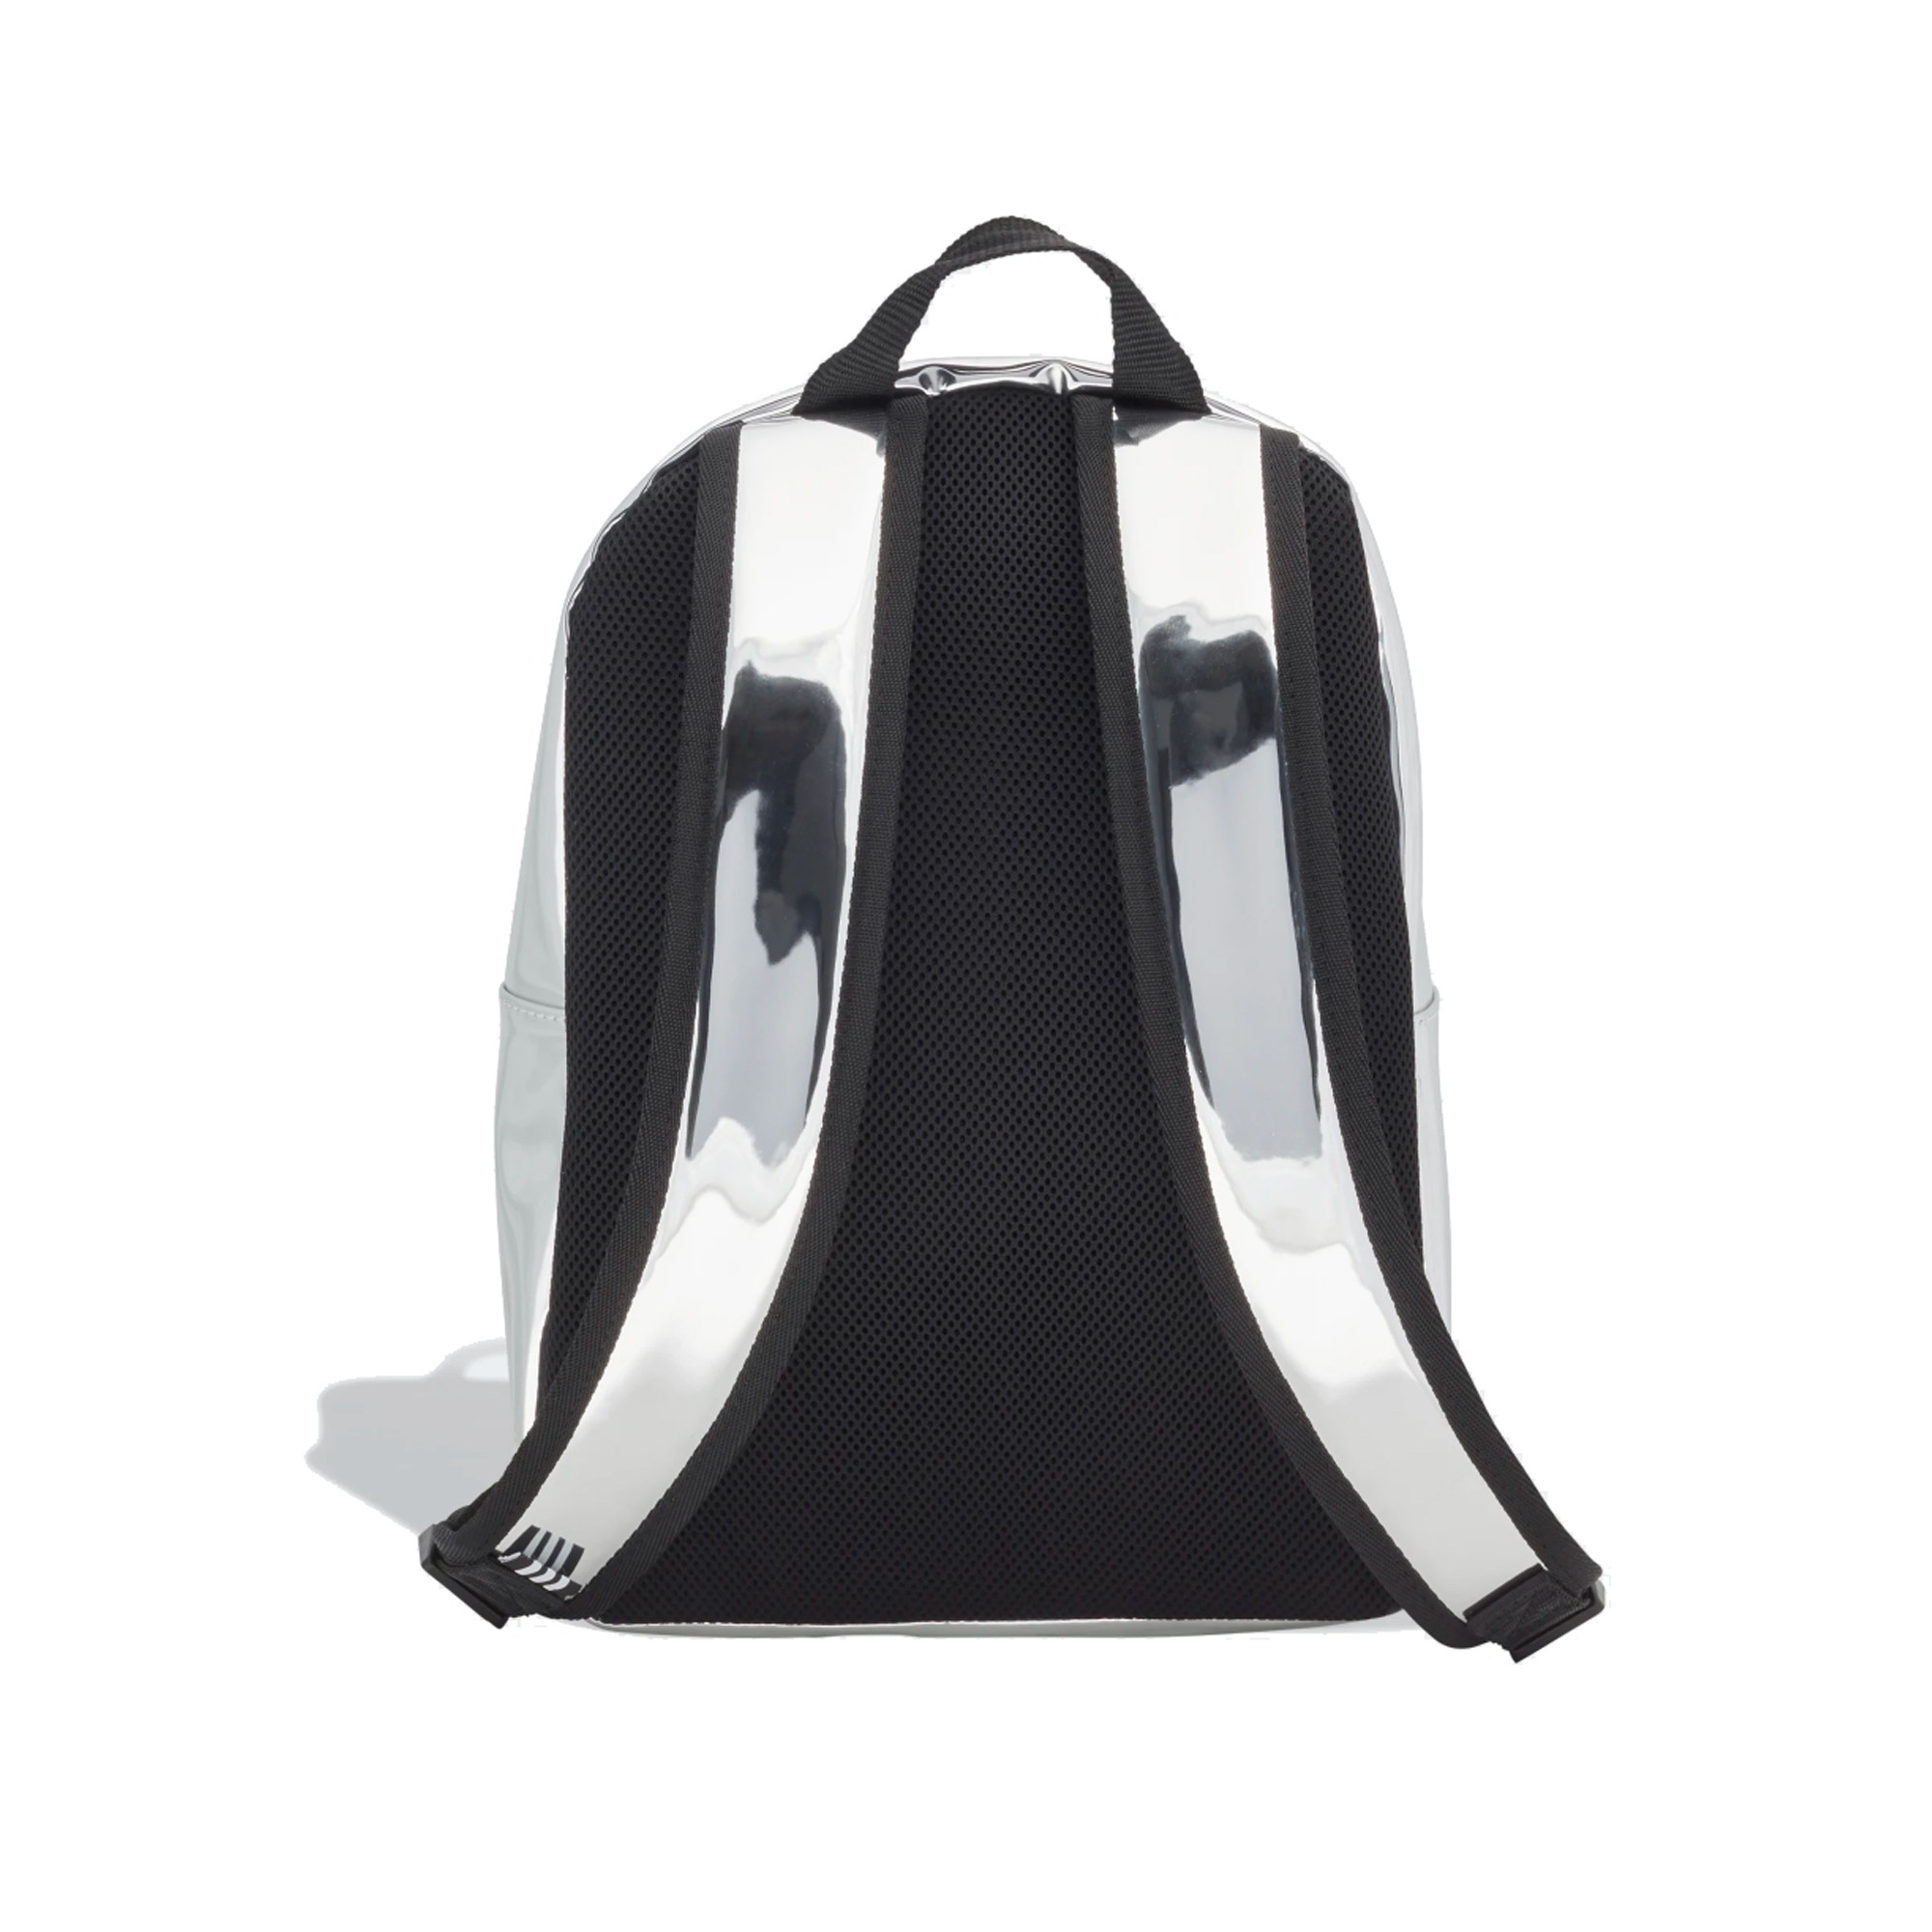 silver adidas backpack